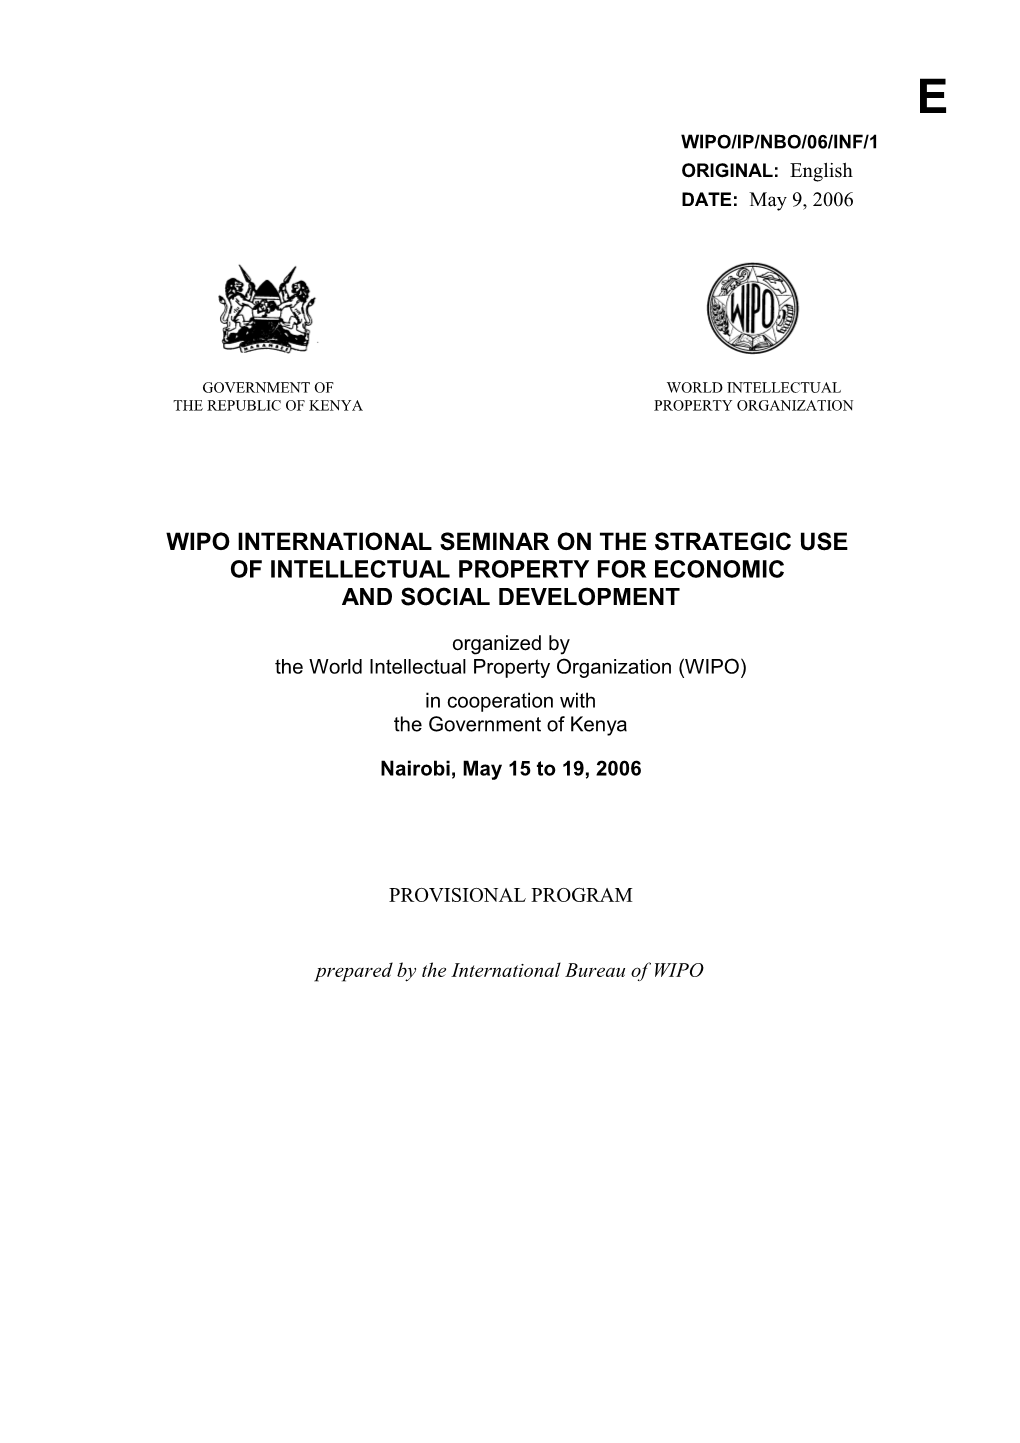 WIPO/IP/NBO/06/INF/1 Prov